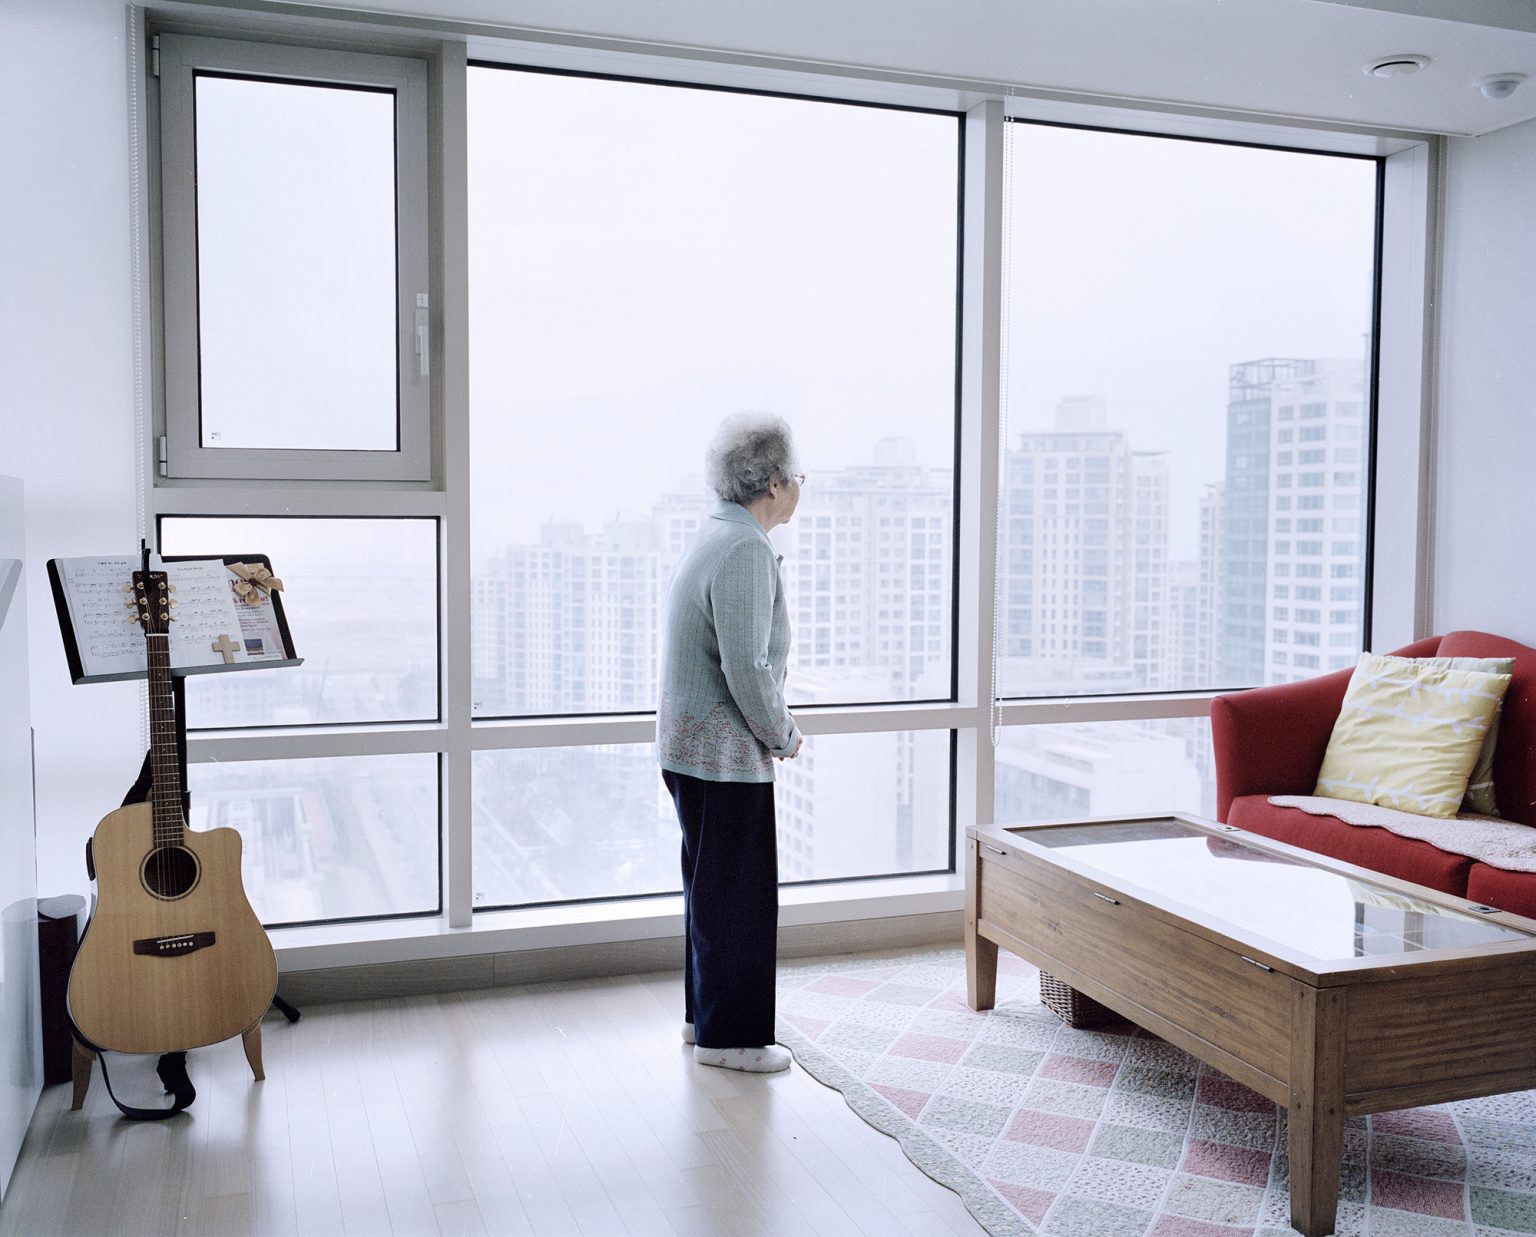 Songdo International Business District, South Korea, 2015.Elderly woman looking out of the window of her new apartment, where she was moved by order of the South Korean Government. She had never step foot in a skyscraper before and spent 5 hours gazing in awe at a landscape completely new to her.